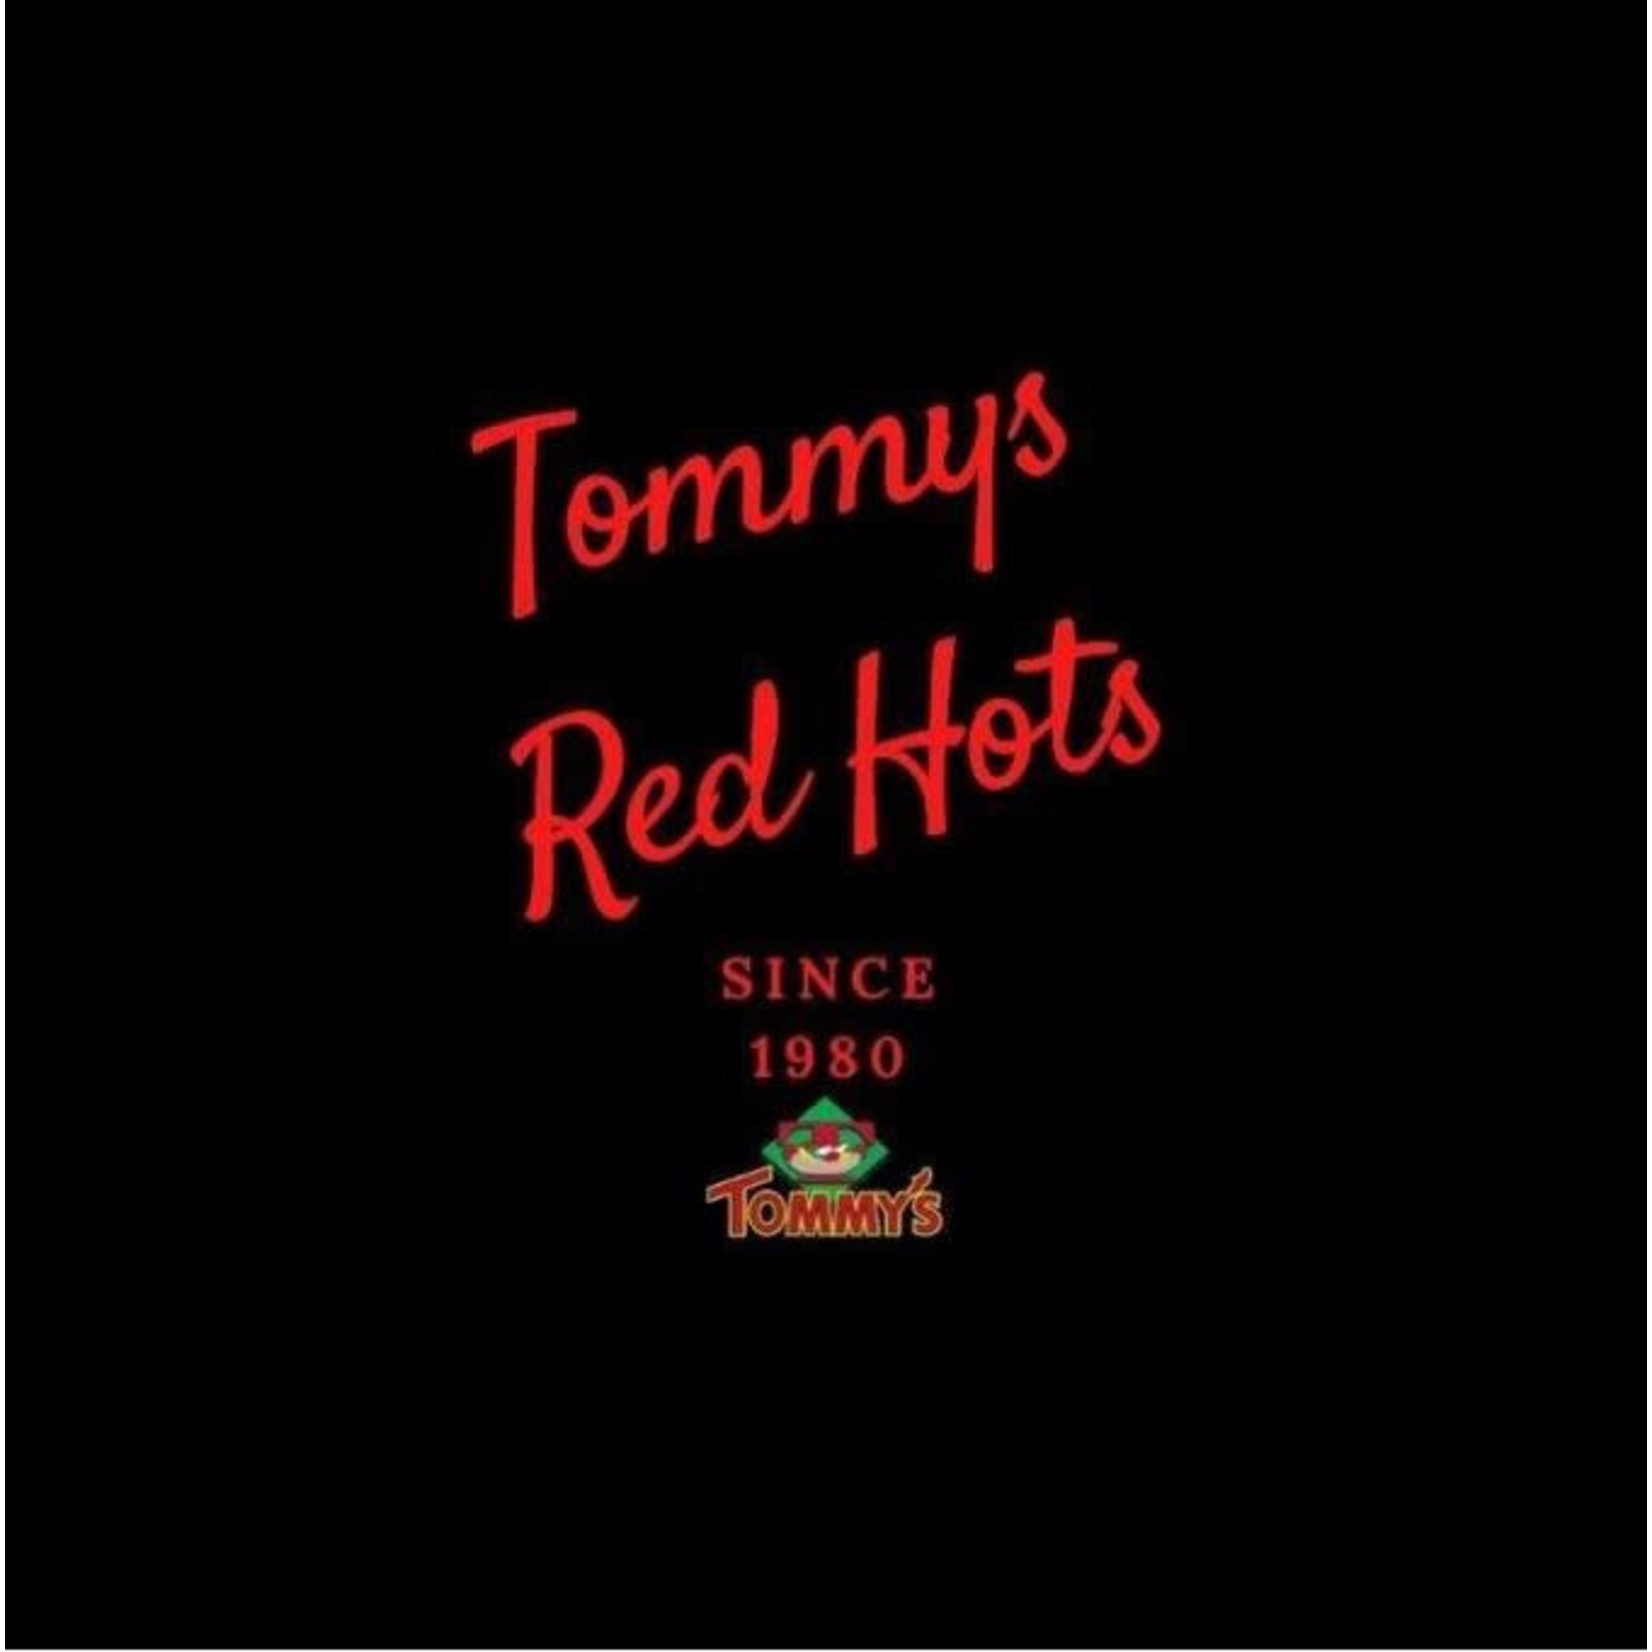 Tommy's Red Hots-Woodstock Tommy's Red Hots-Woodstock $10.00 Dining Certificate